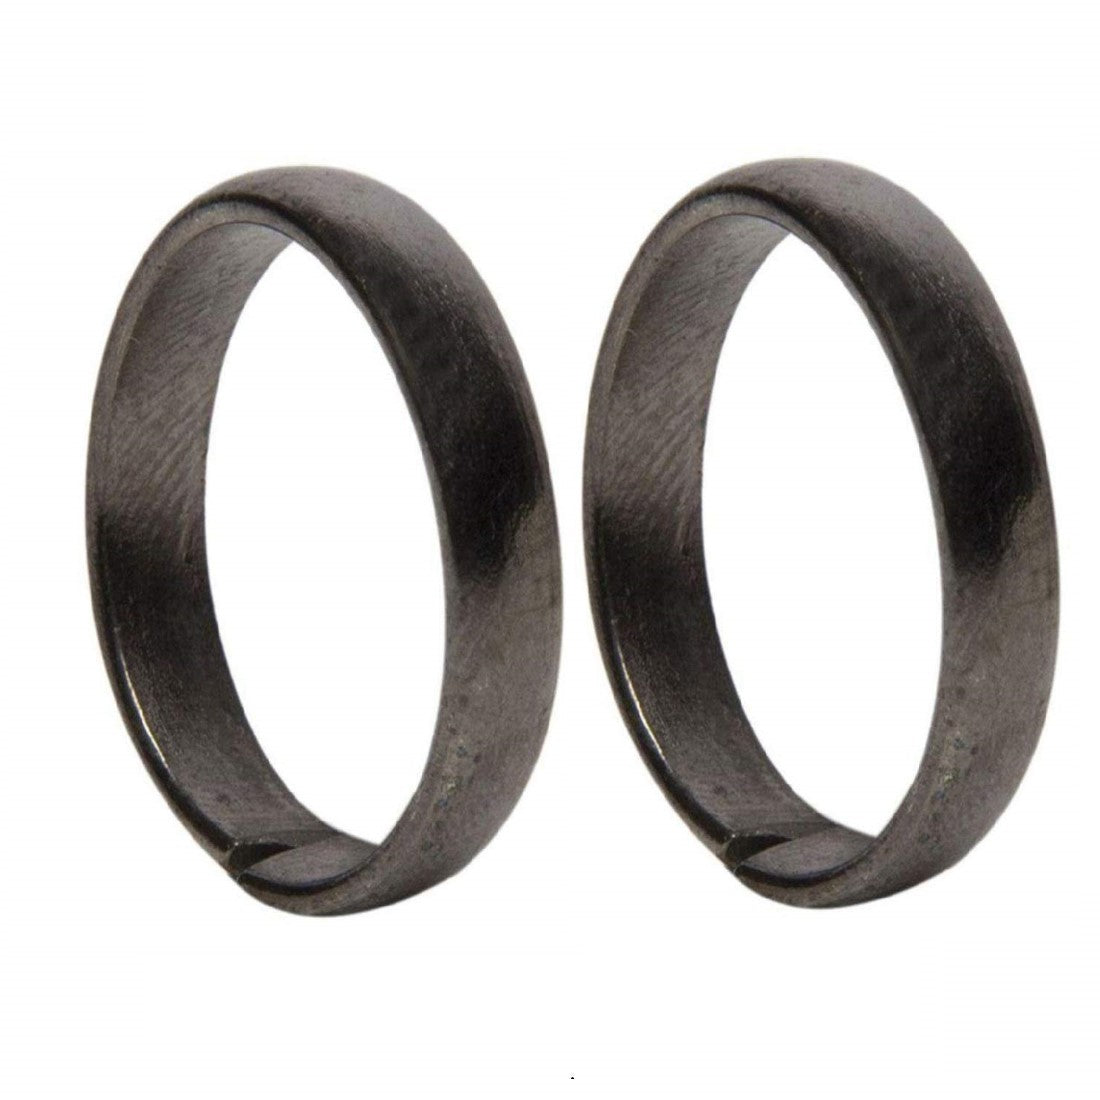 Pure Iron Ring Saturn Shani Challa Real Black Horse Shoe Adjustable Ring  for Men and Women for Good Luck/Evil Energy(Kale Ghode ki Naal Ki Ring) Set  of 5|Amazon.com